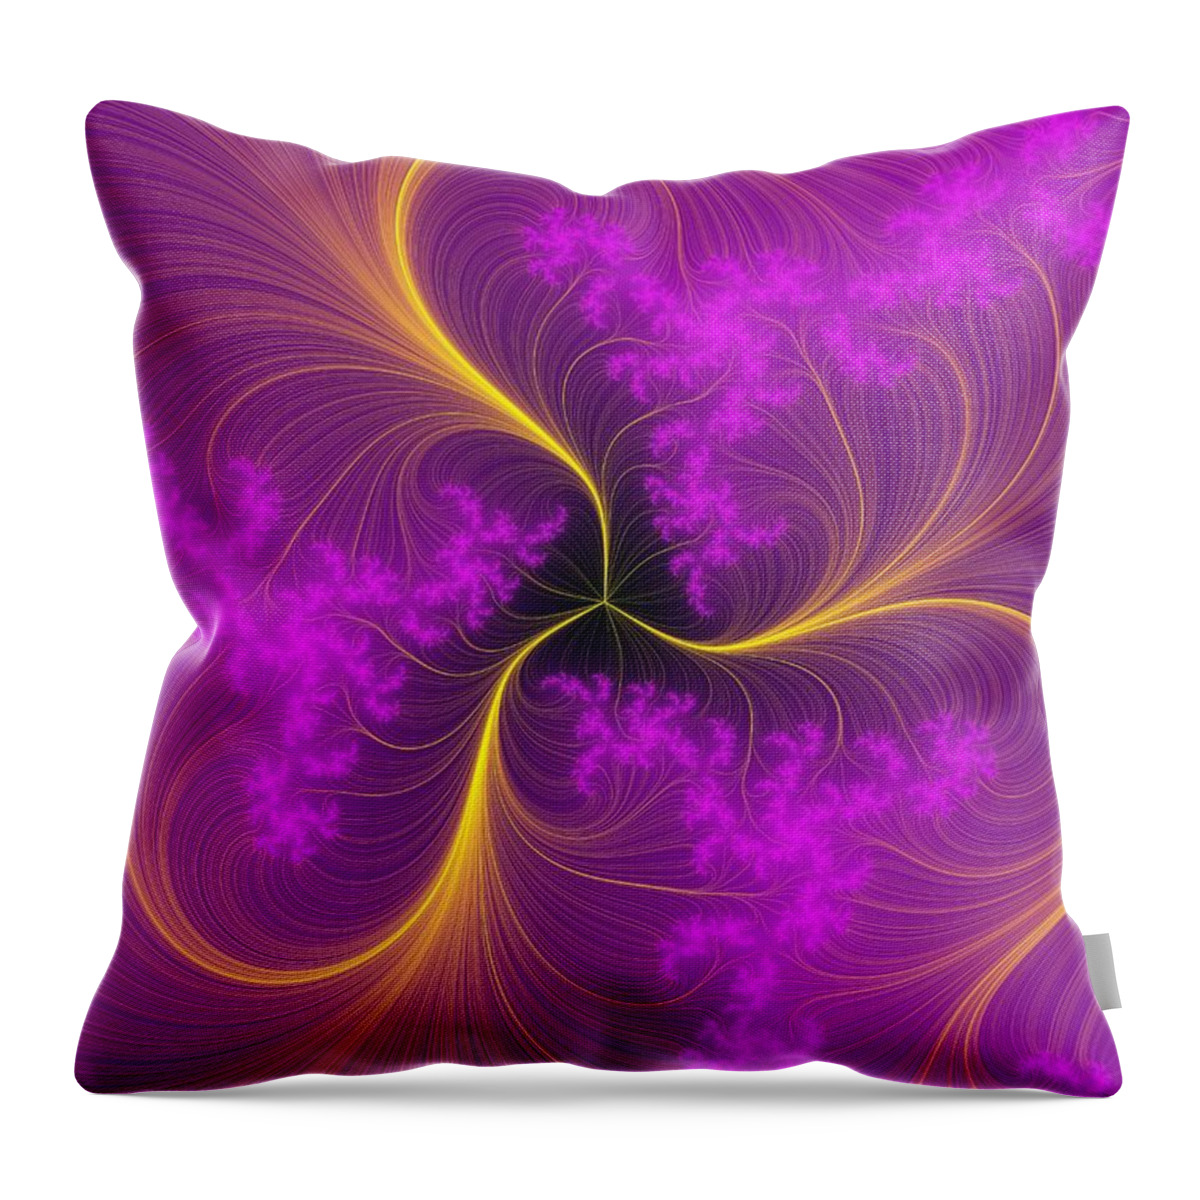 Fractal Throw Pillow featuring the digital art Fancy Feathers by Sharon Woerner